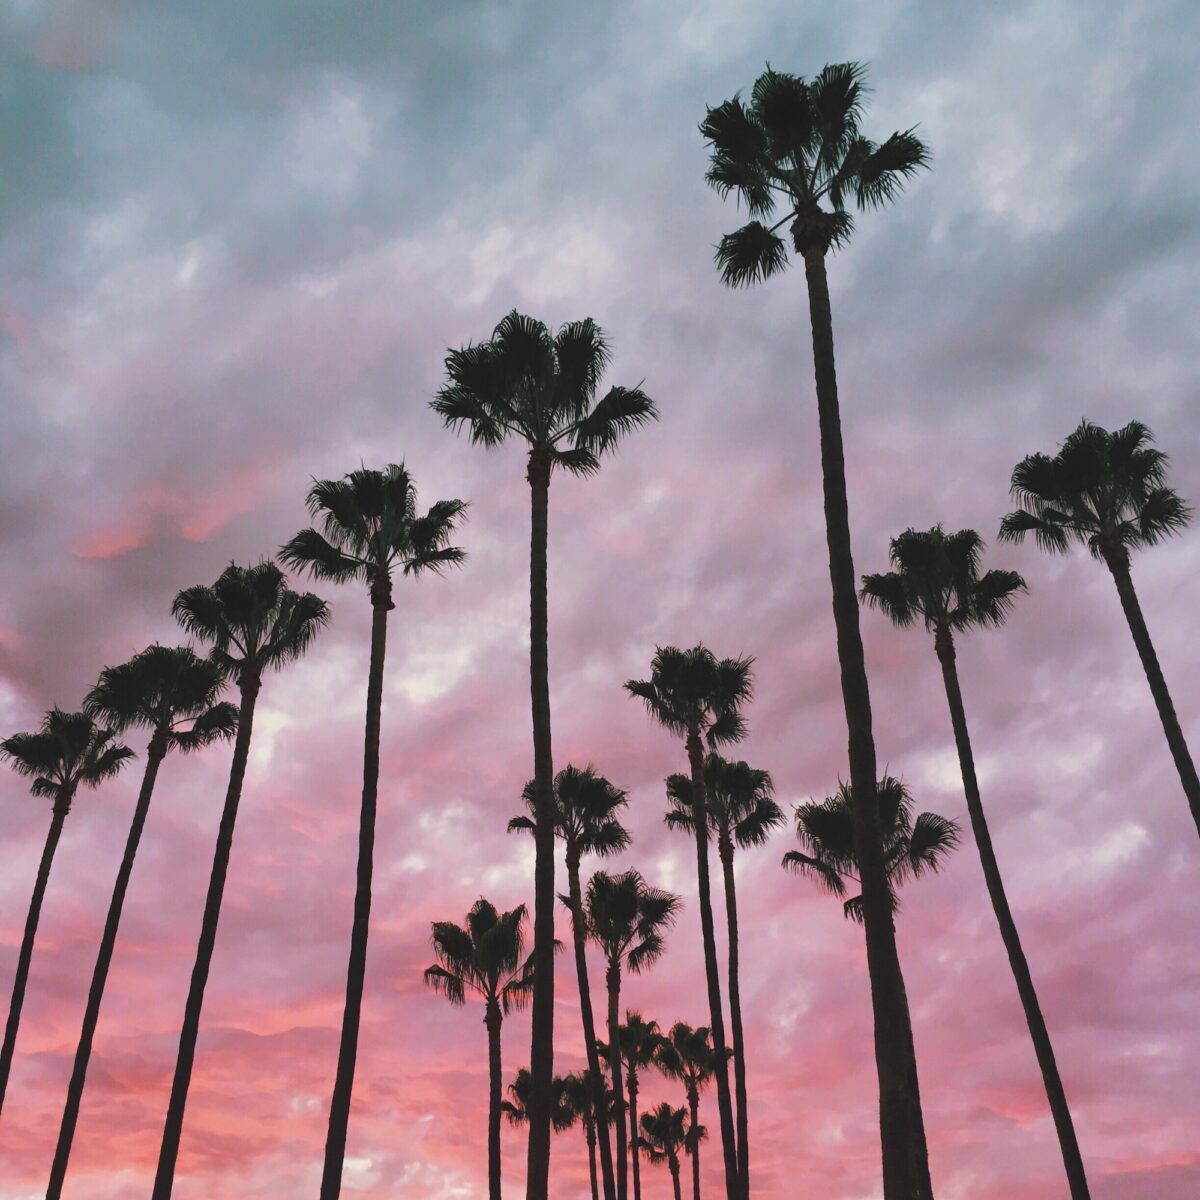 Palm Trees with Sunset in the Background